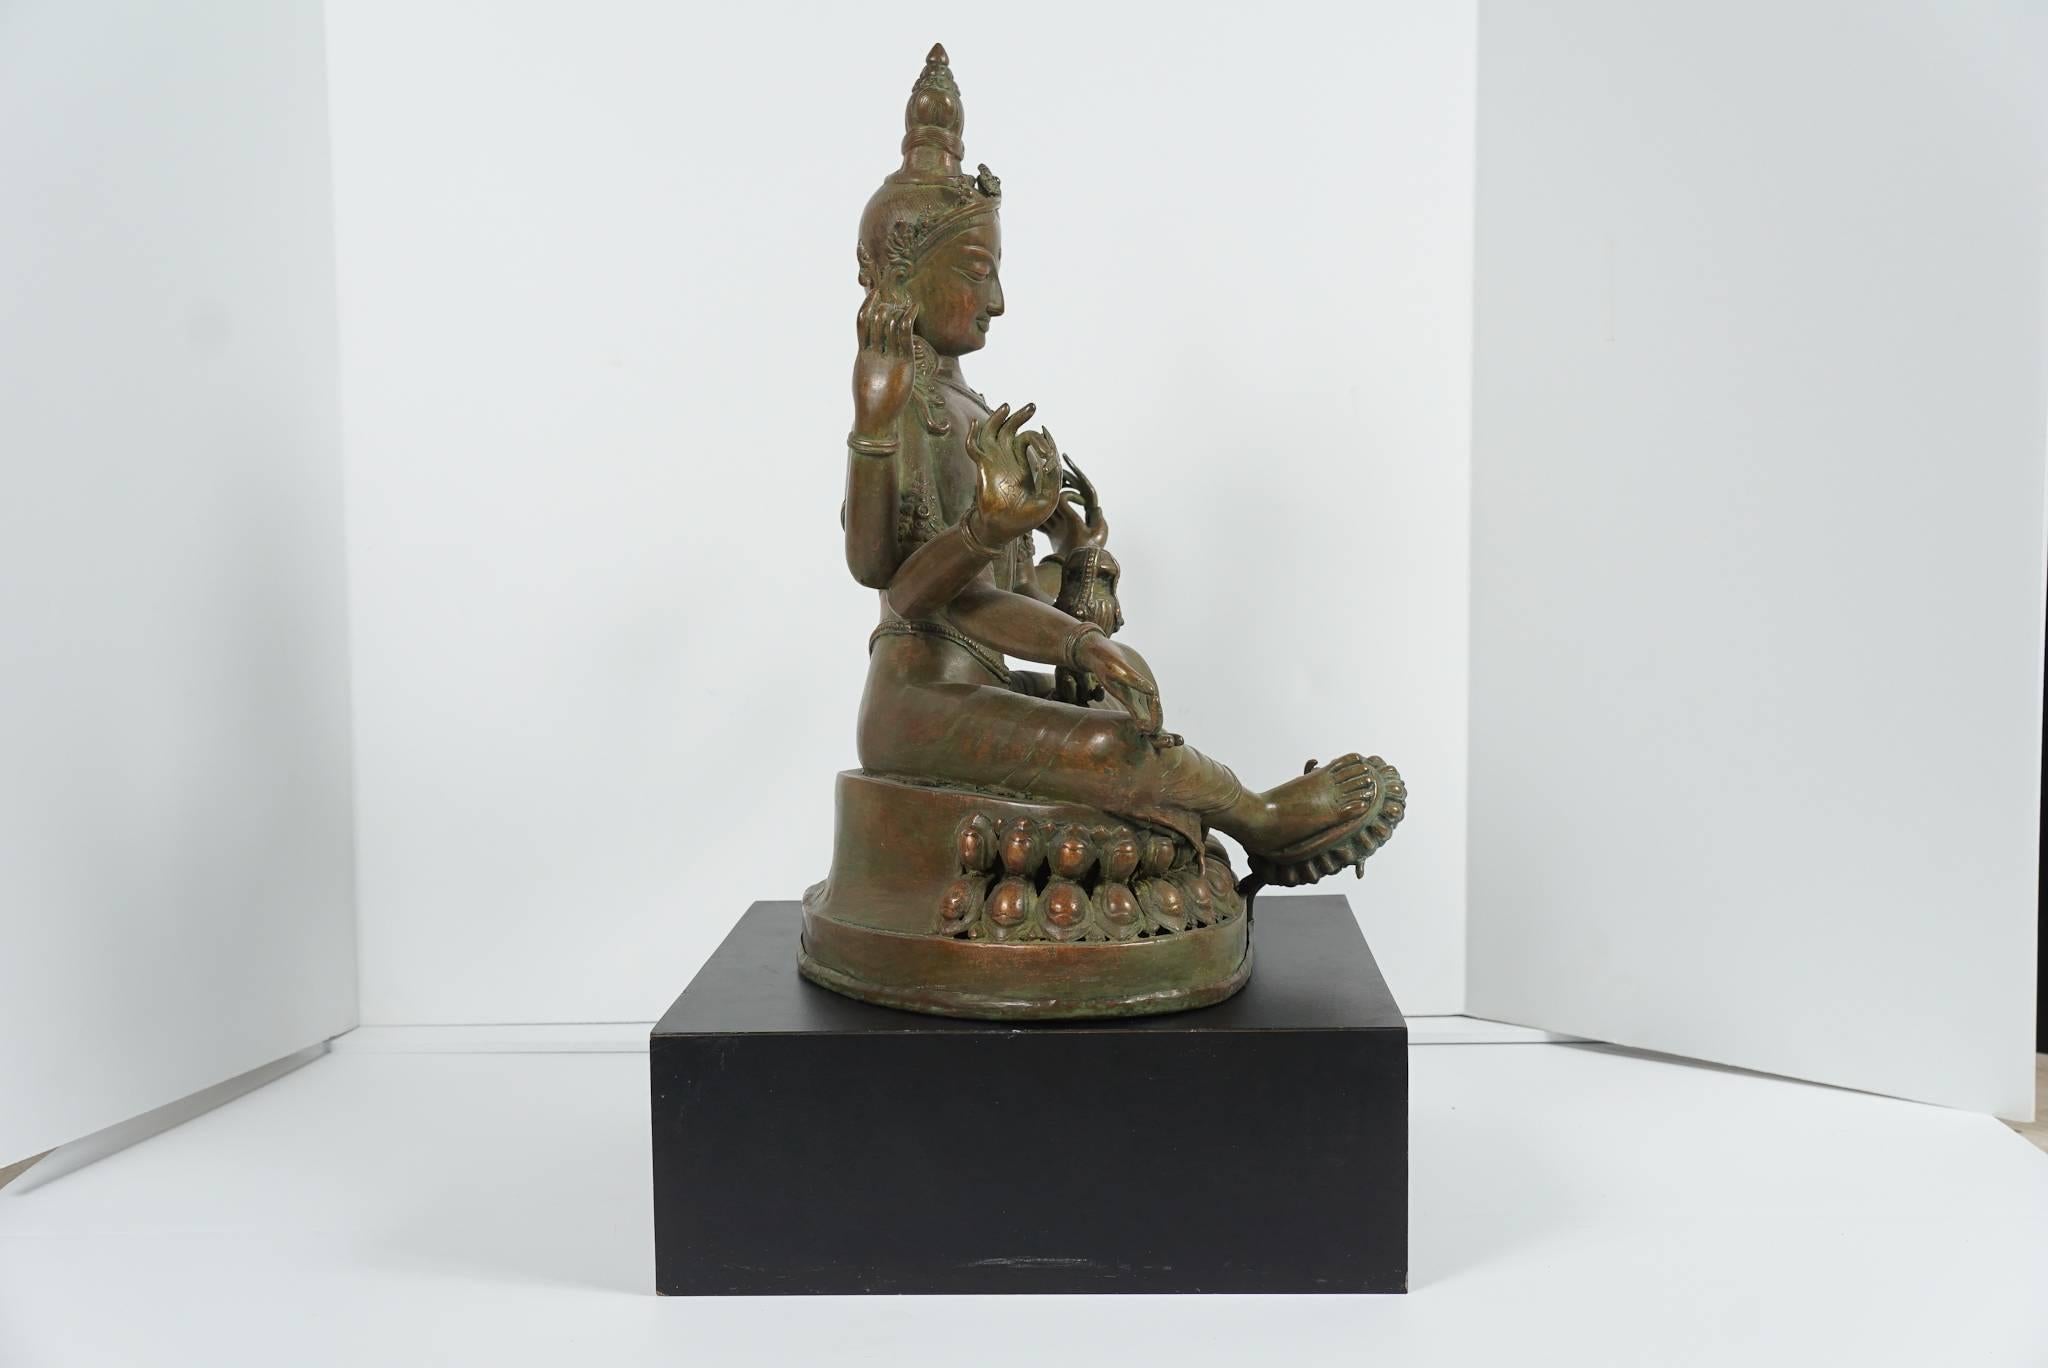 This fine old bronze of Tara was made for the purpose of focusing on the process of meditation regarding her aspects of wisdom and compassion. Crafted in Tibet but nearer to India and its influences this figure is an interesting combination of Hindu